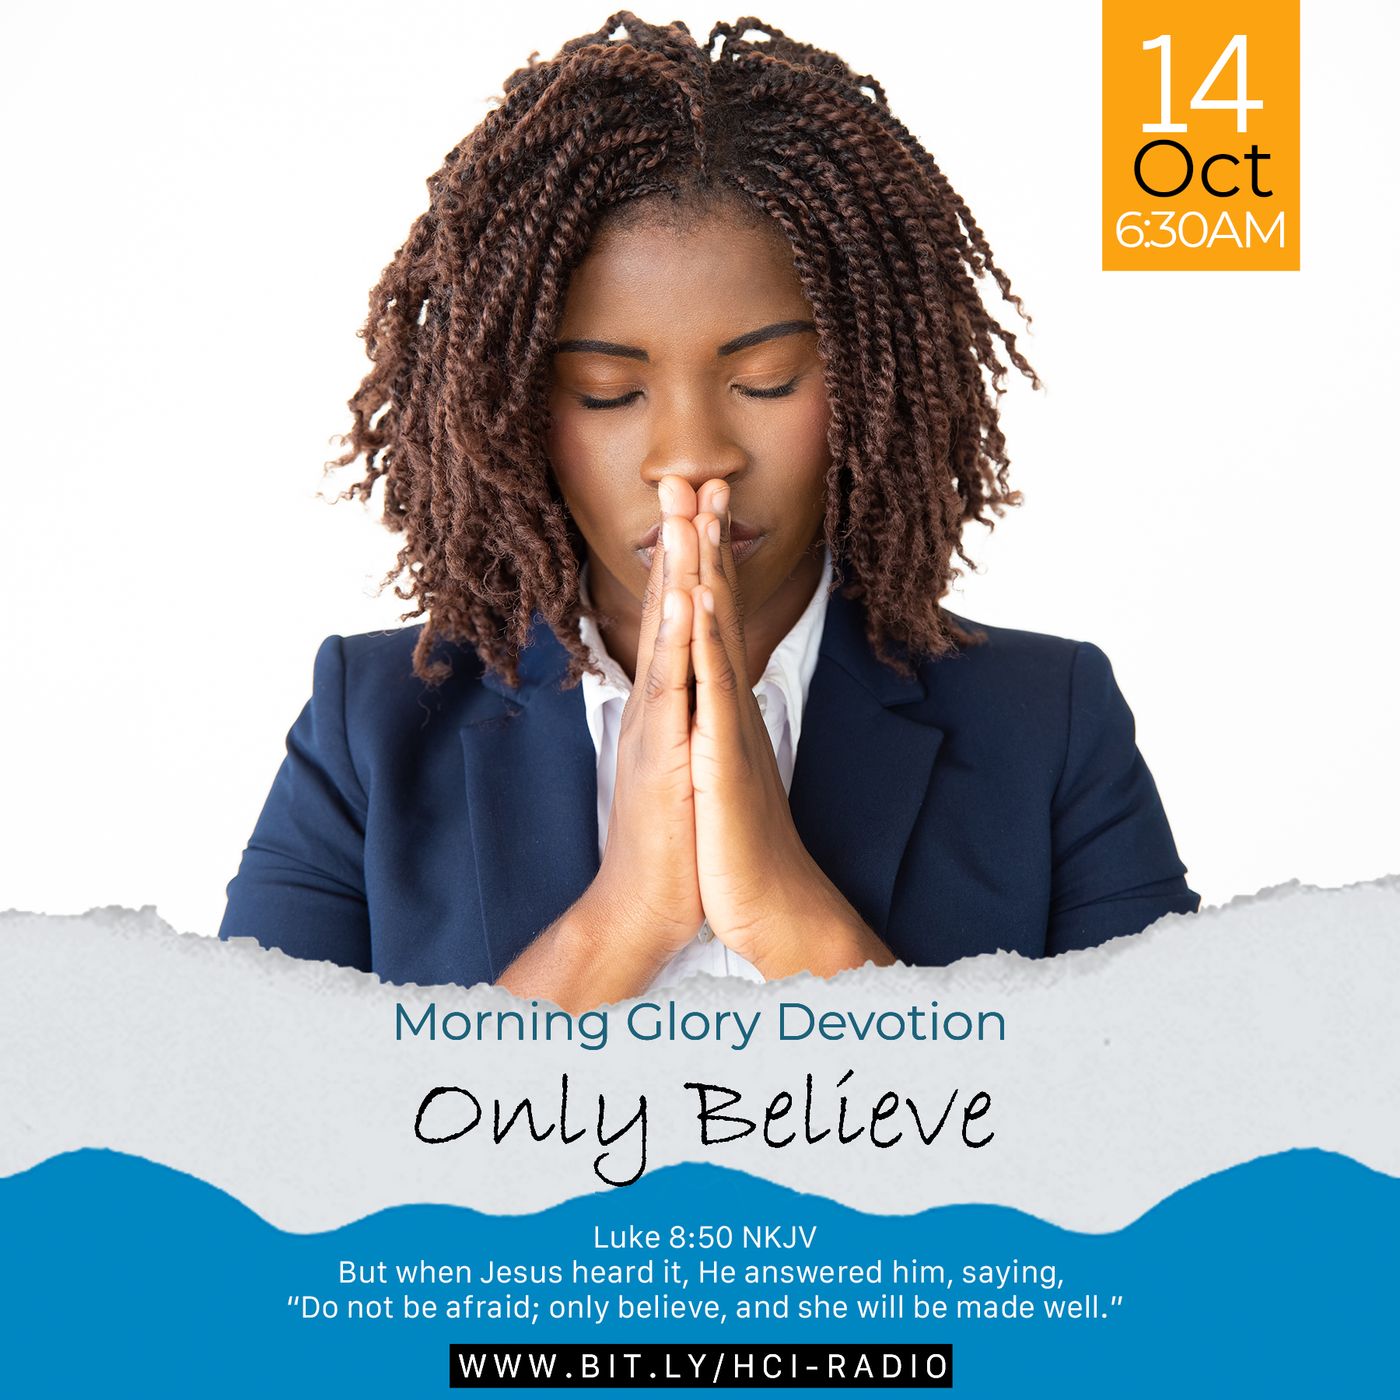 MGD: Only Believe